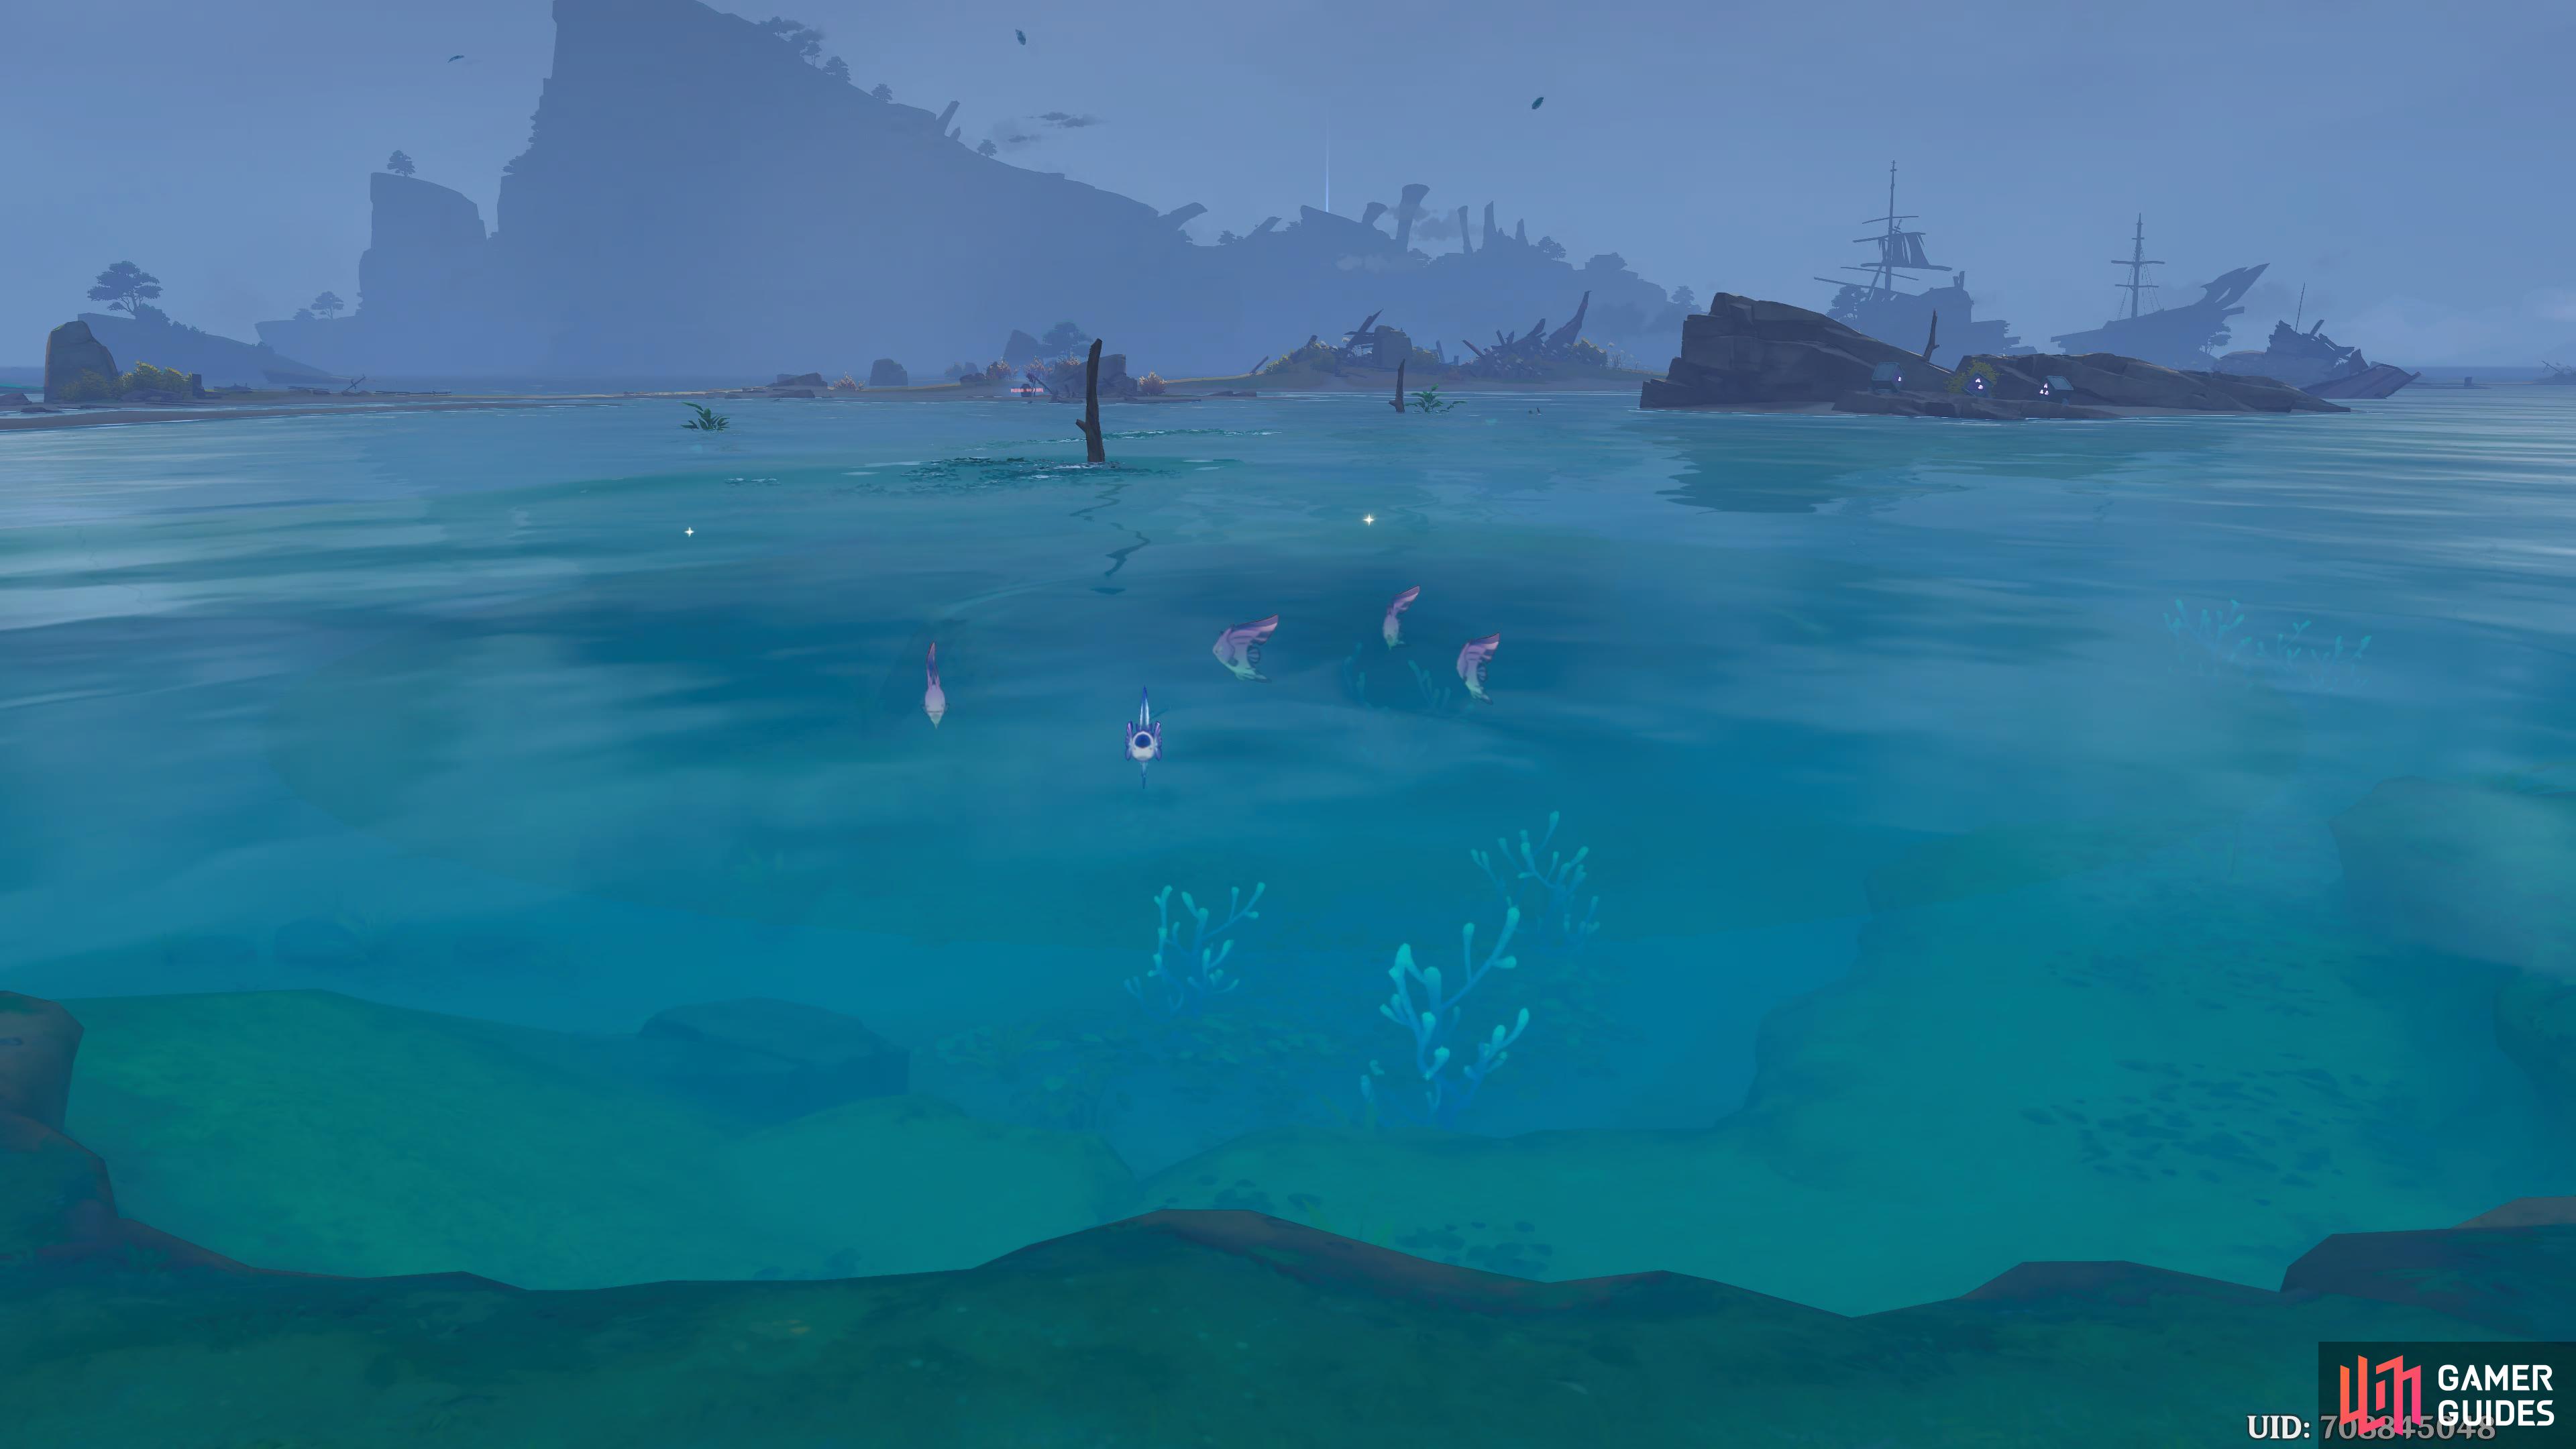 Here's a visual of the Day 7 Fishing Point.